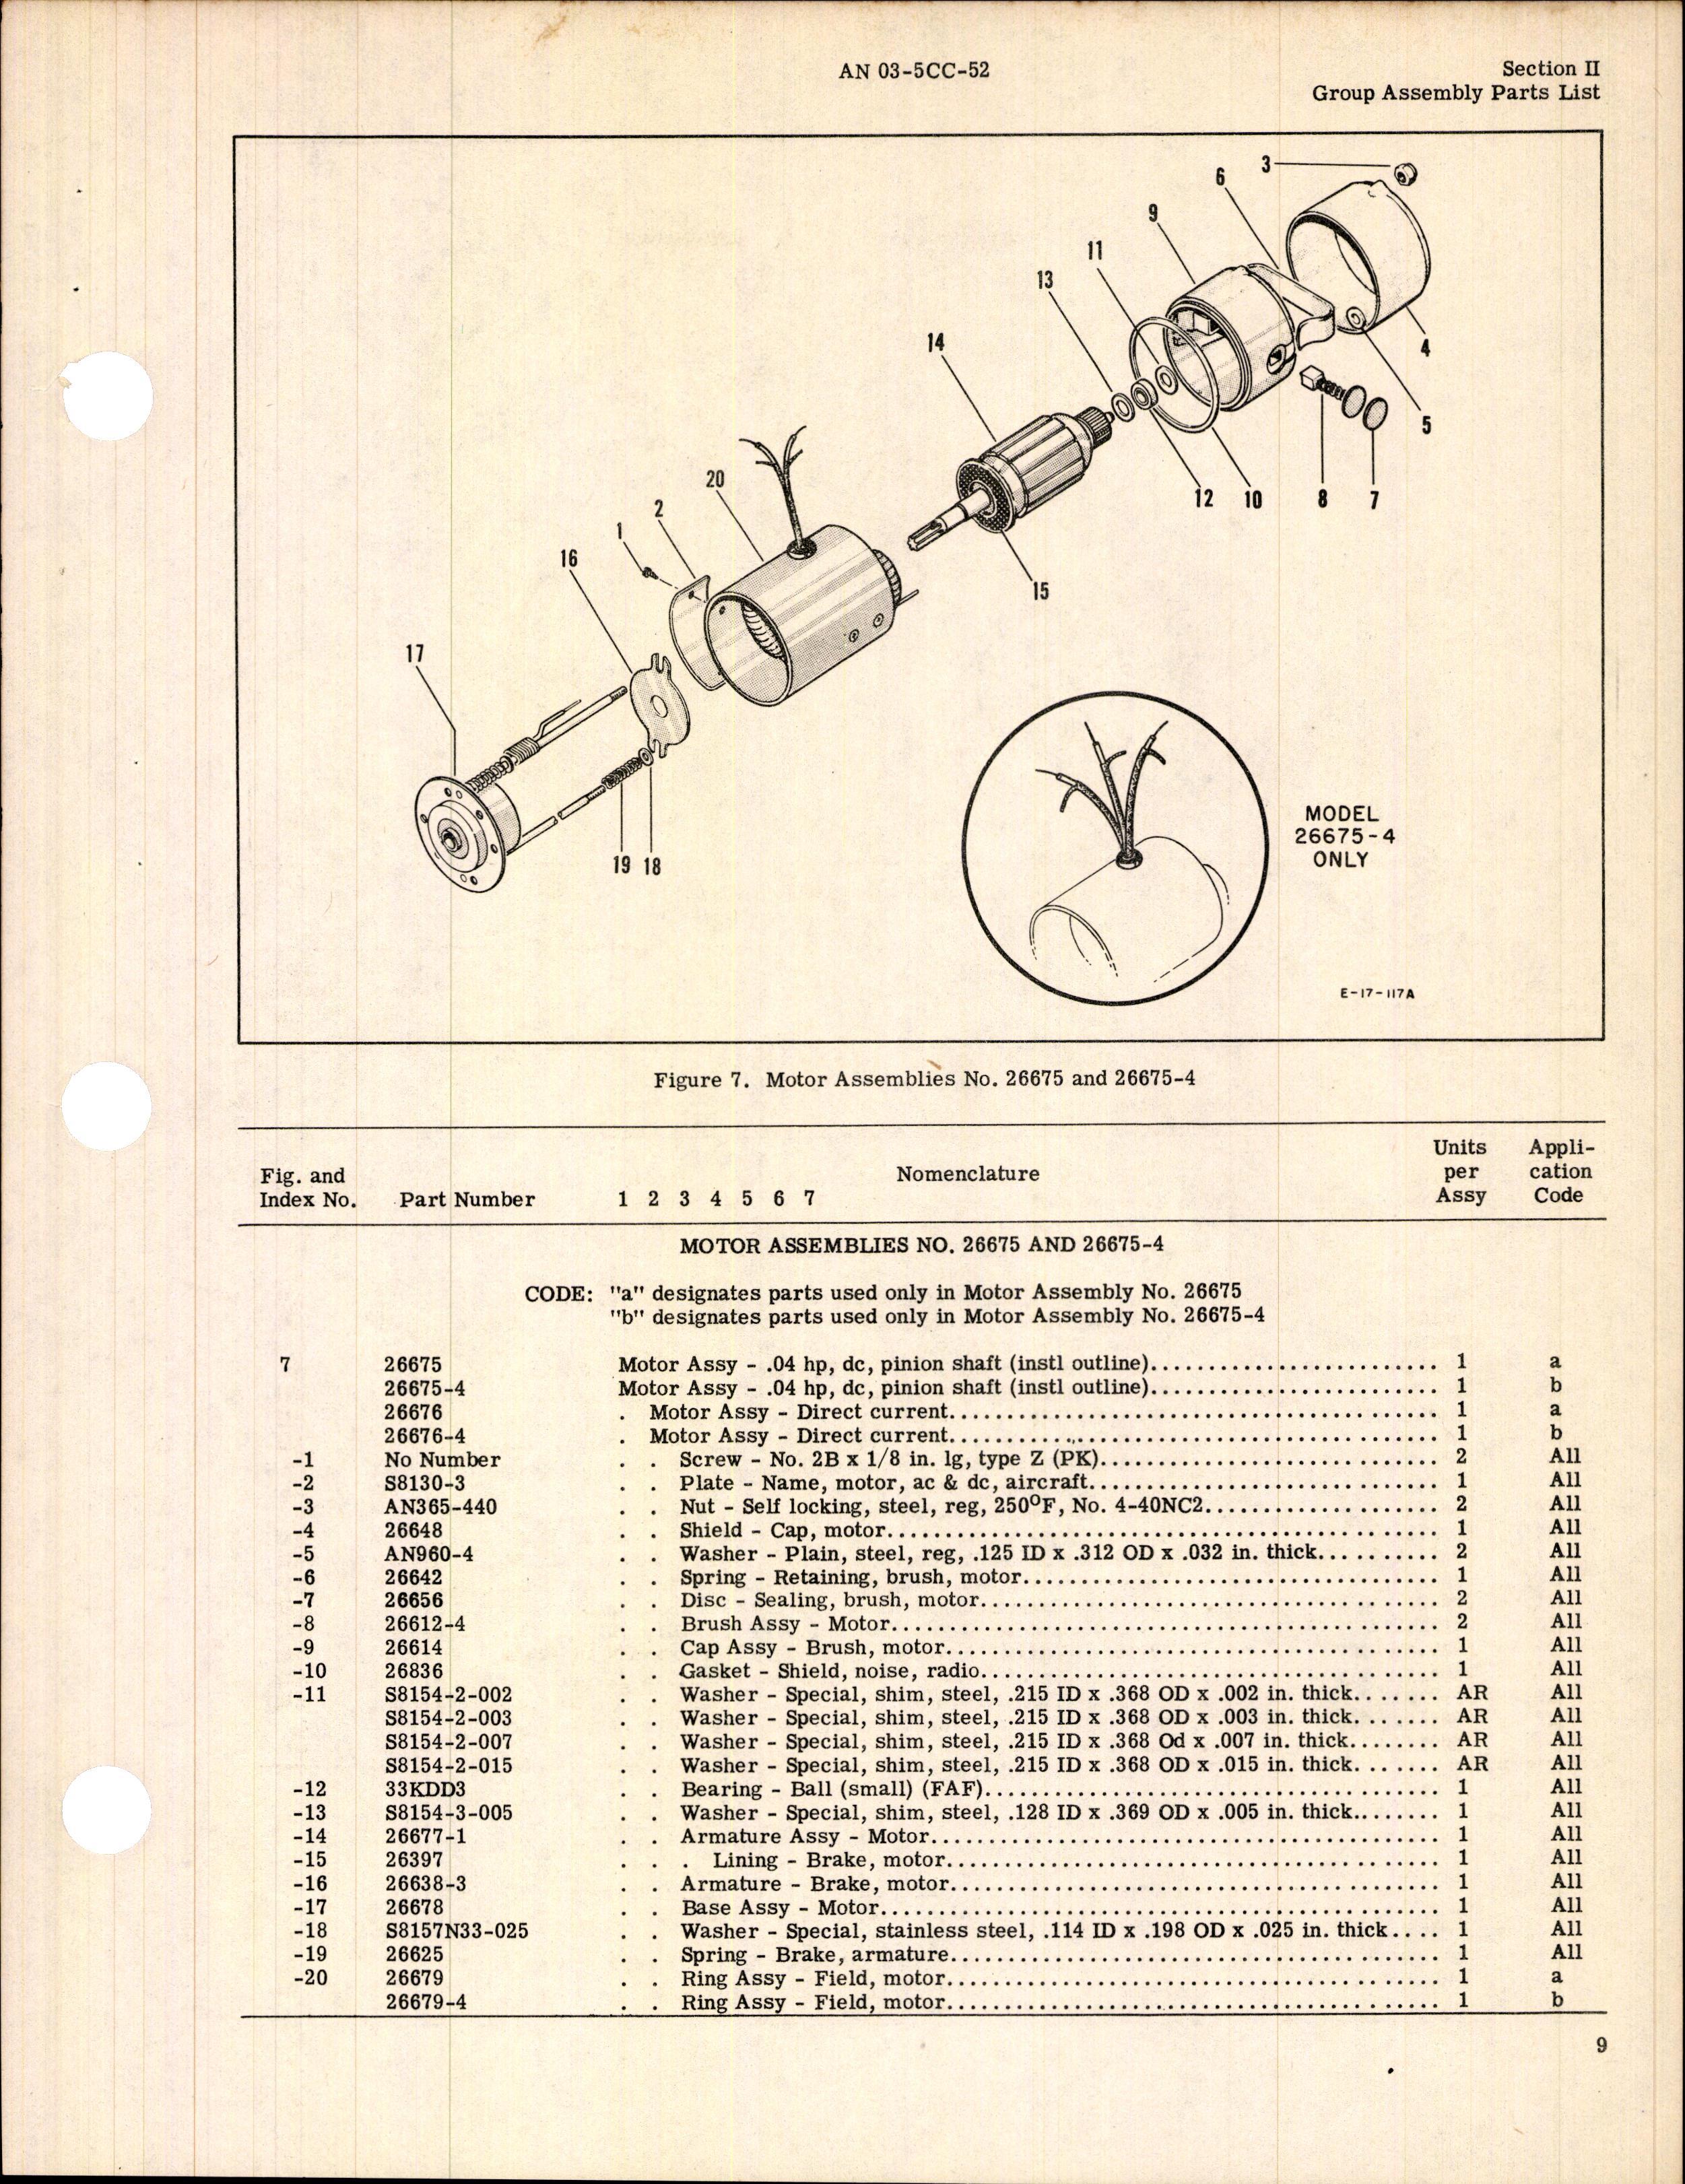 Sample page 9 from AirCorps Library document: Parts Catalog for Airesearch Electric Motors